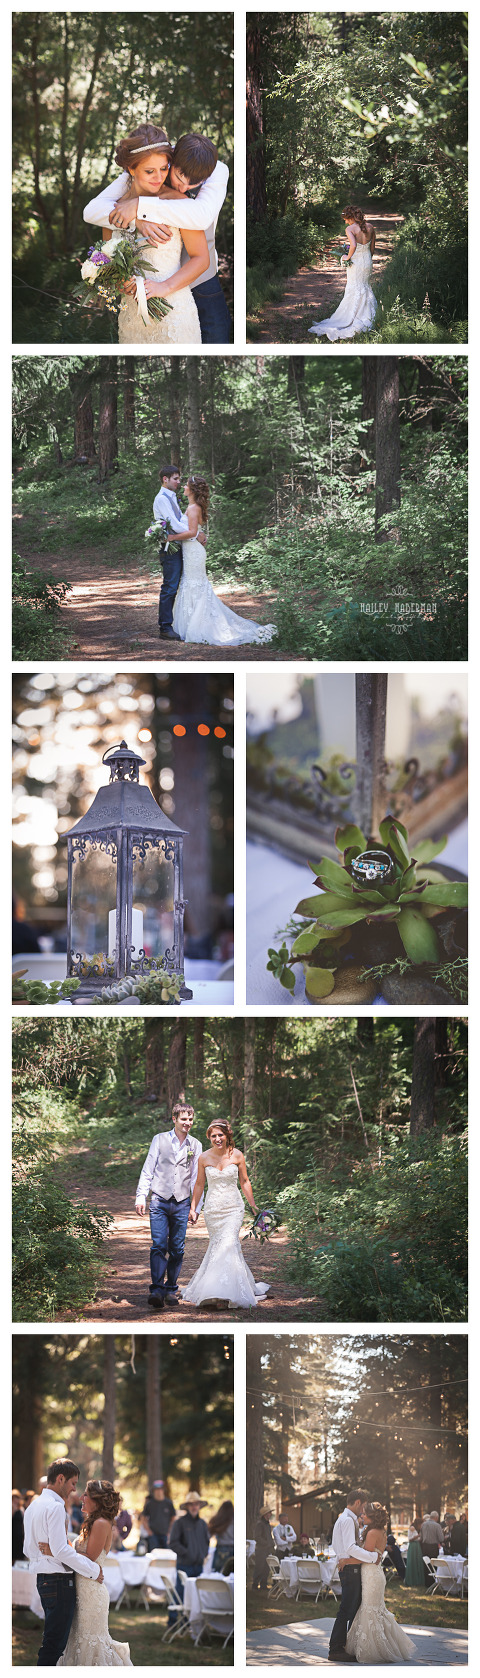 Country Wedding in the Woods with Jeremy & Alexa by Hailey Haberman Cle Elum Photographer